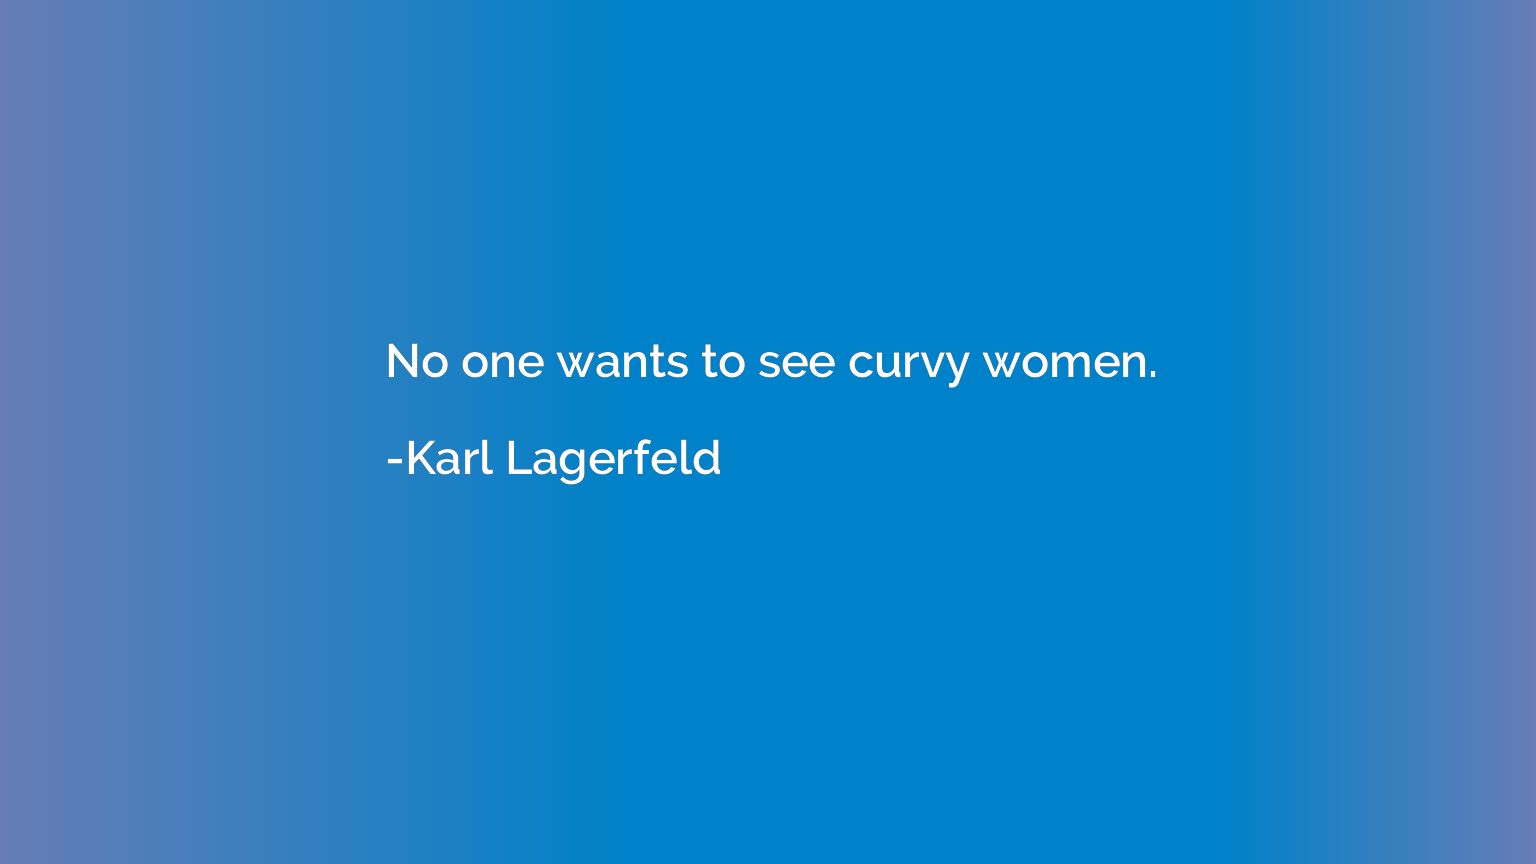 No one wants to see curvy women.